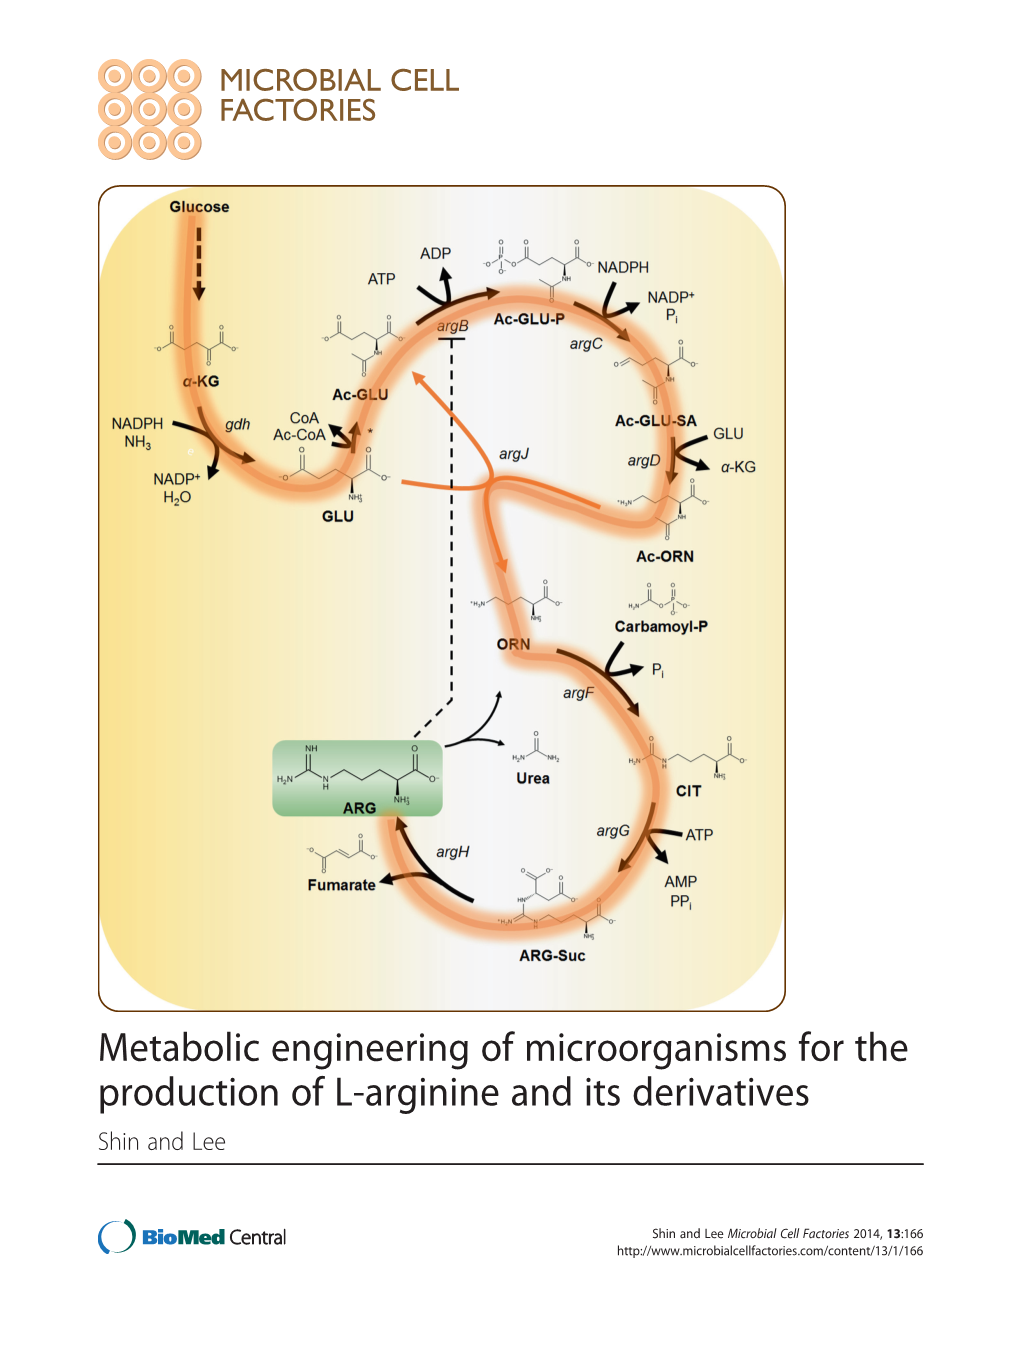 Metabolic Engineering of Microorganisms for the Production of L-Arginine and Its Derivatives Shin and Lee